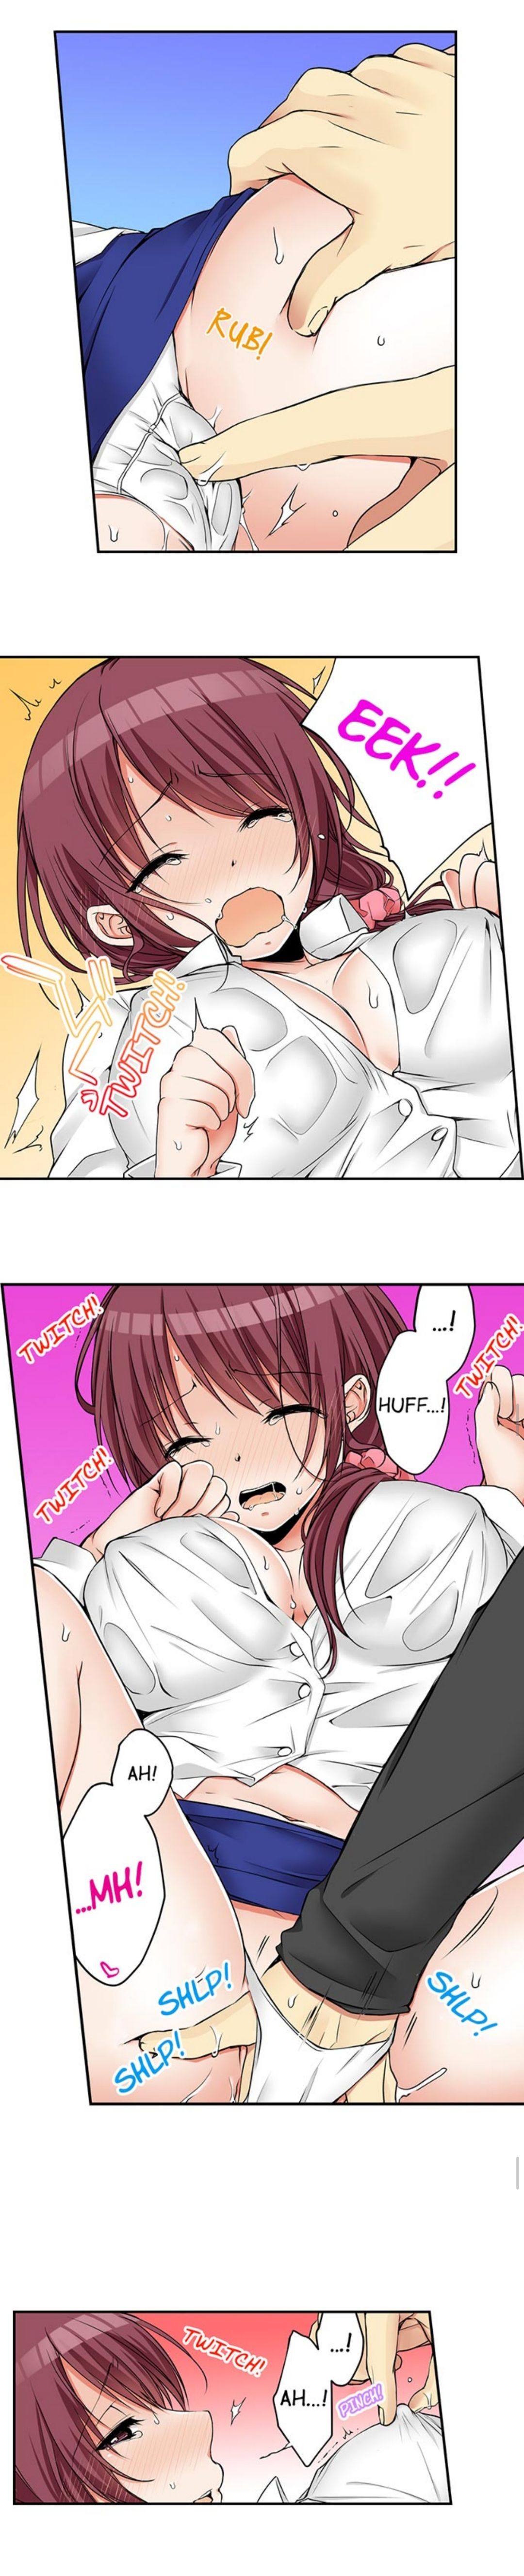 [Kouno Aya] I Did Naughty Things With My (Drunk) Sister (Ongoing) [煌乃あや] 姉貴(泥酔中)と…Hしちゃいました。